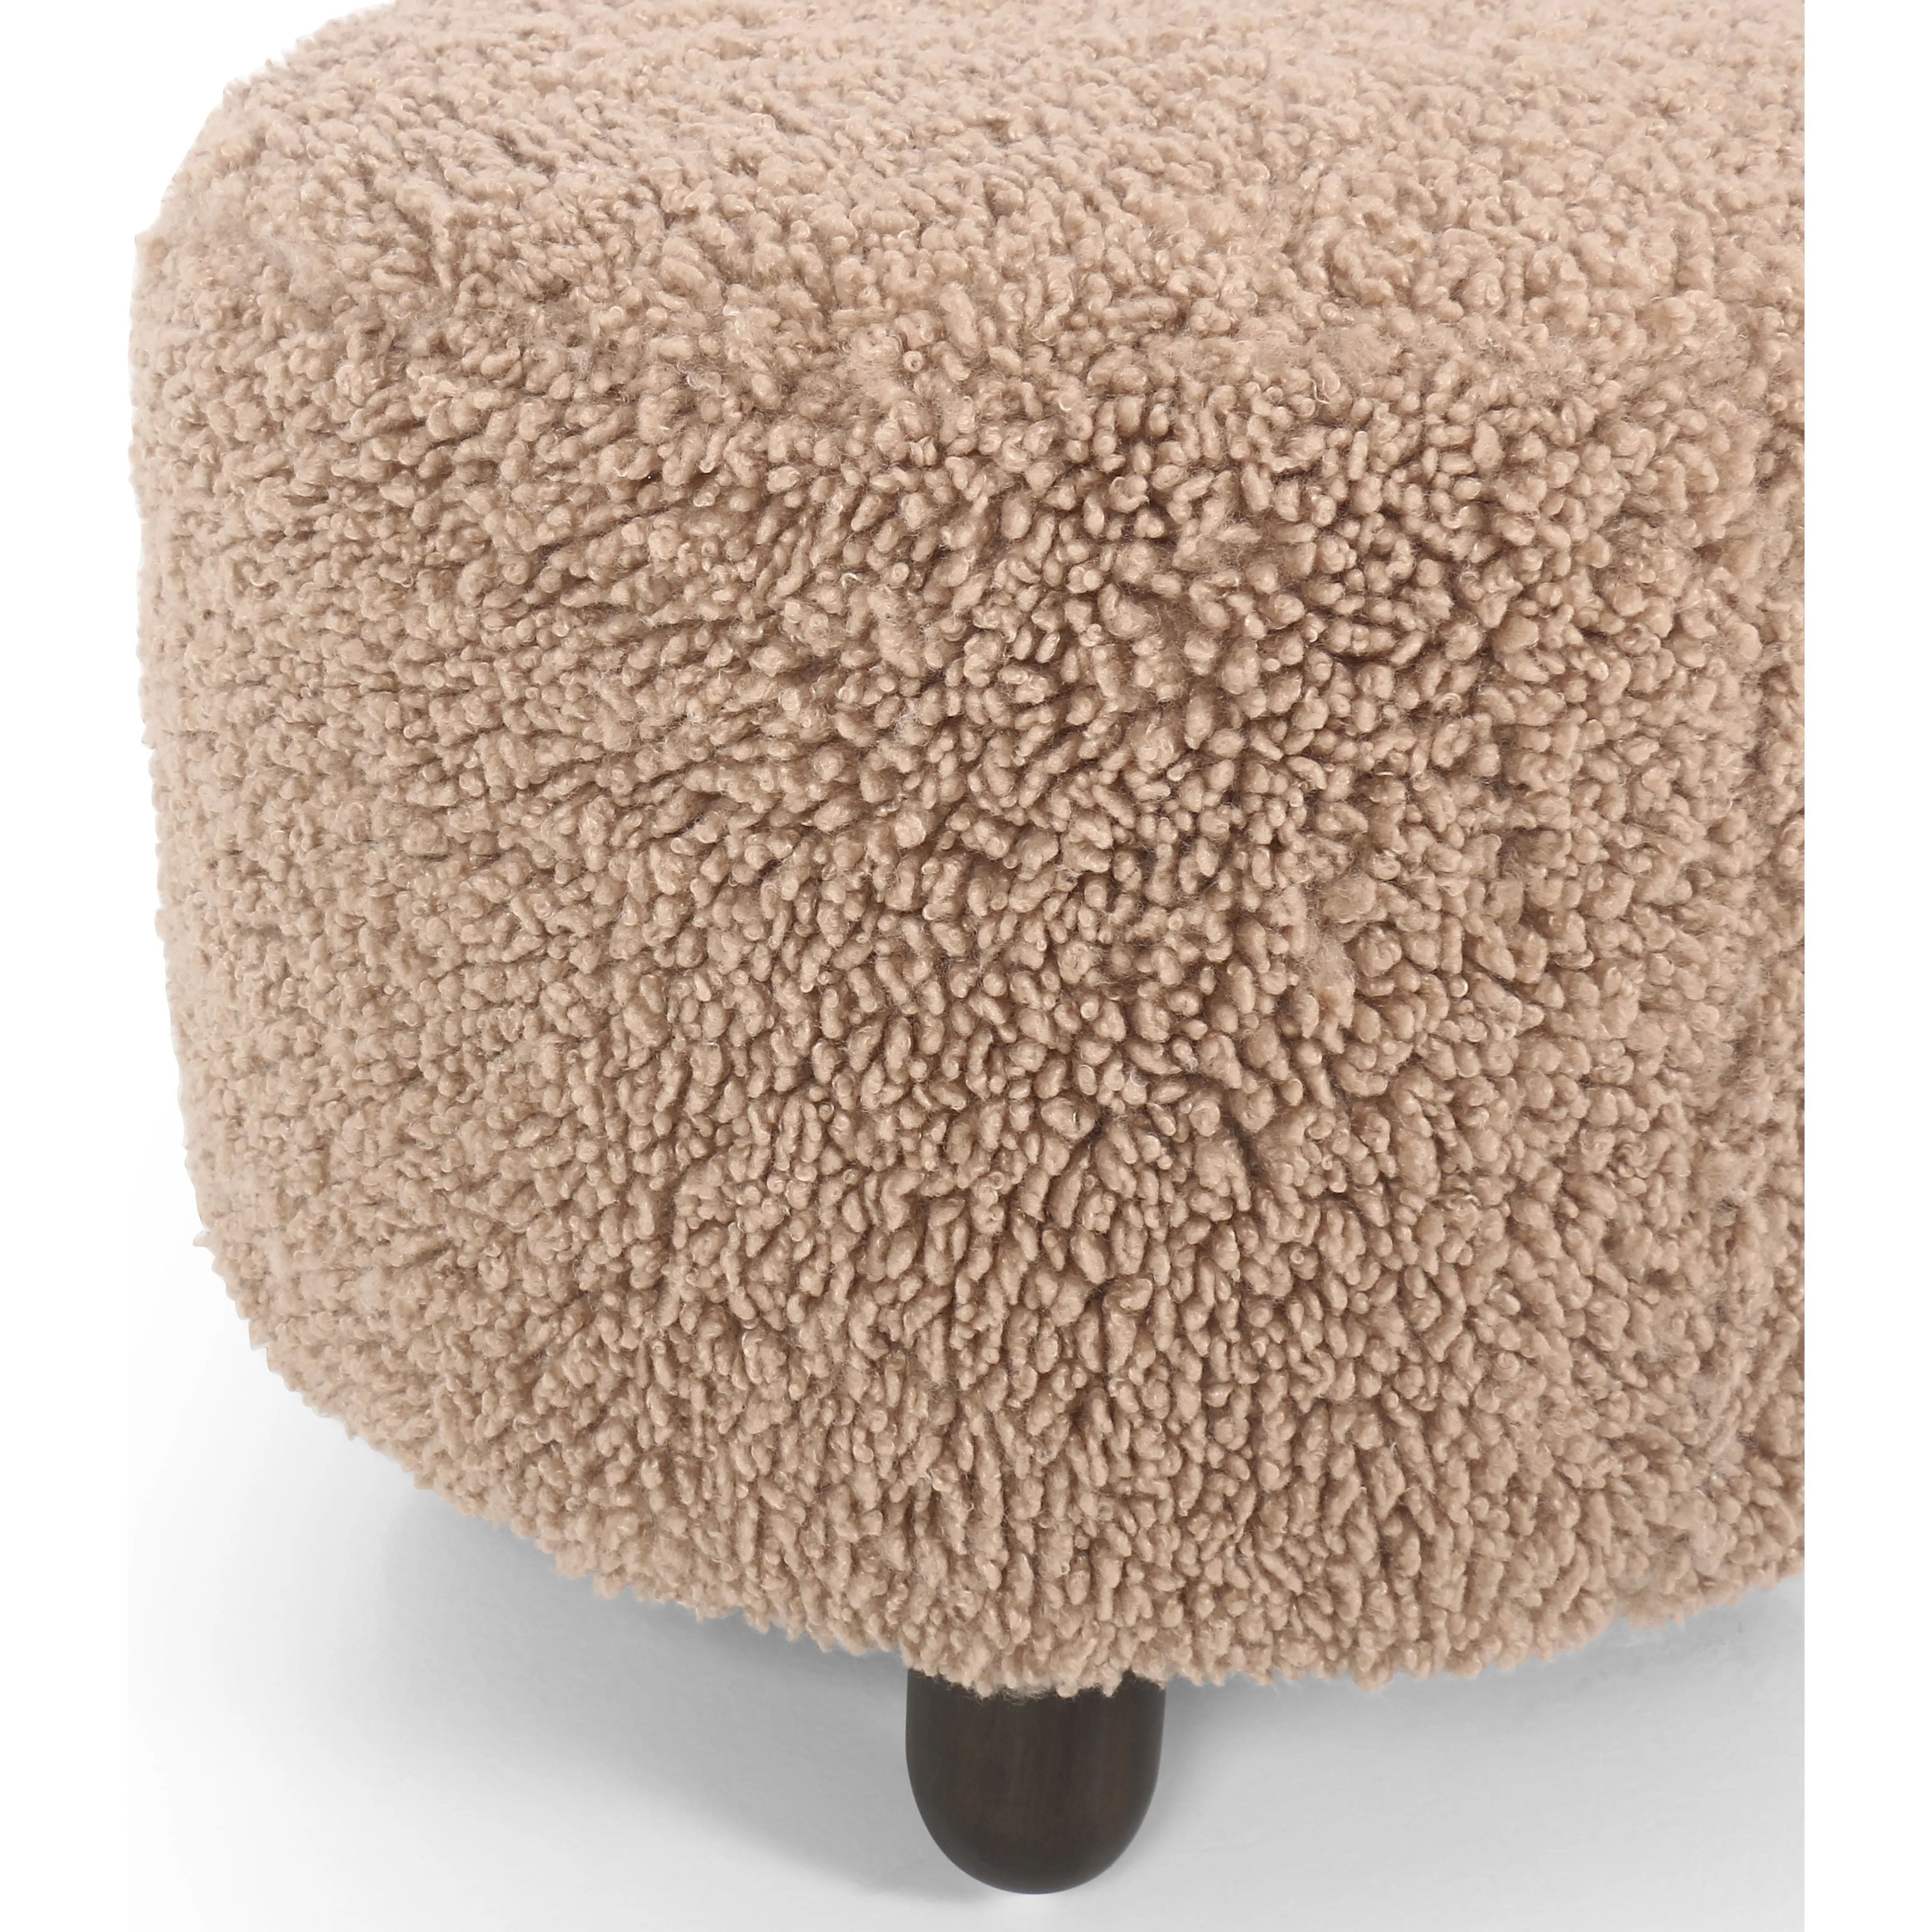 Place this round ottoman just about anywhere. Upholstered in a faux Mongolian shearling with a high pile fur in a toasty tan neutral hue. Burnt birch parawood legs add a touch of contrast.Collection: Kensingto Amethyst Home provides interior design, new home construction design consulting, vintage area rugs, and lighting in the Winter Garden metro area.